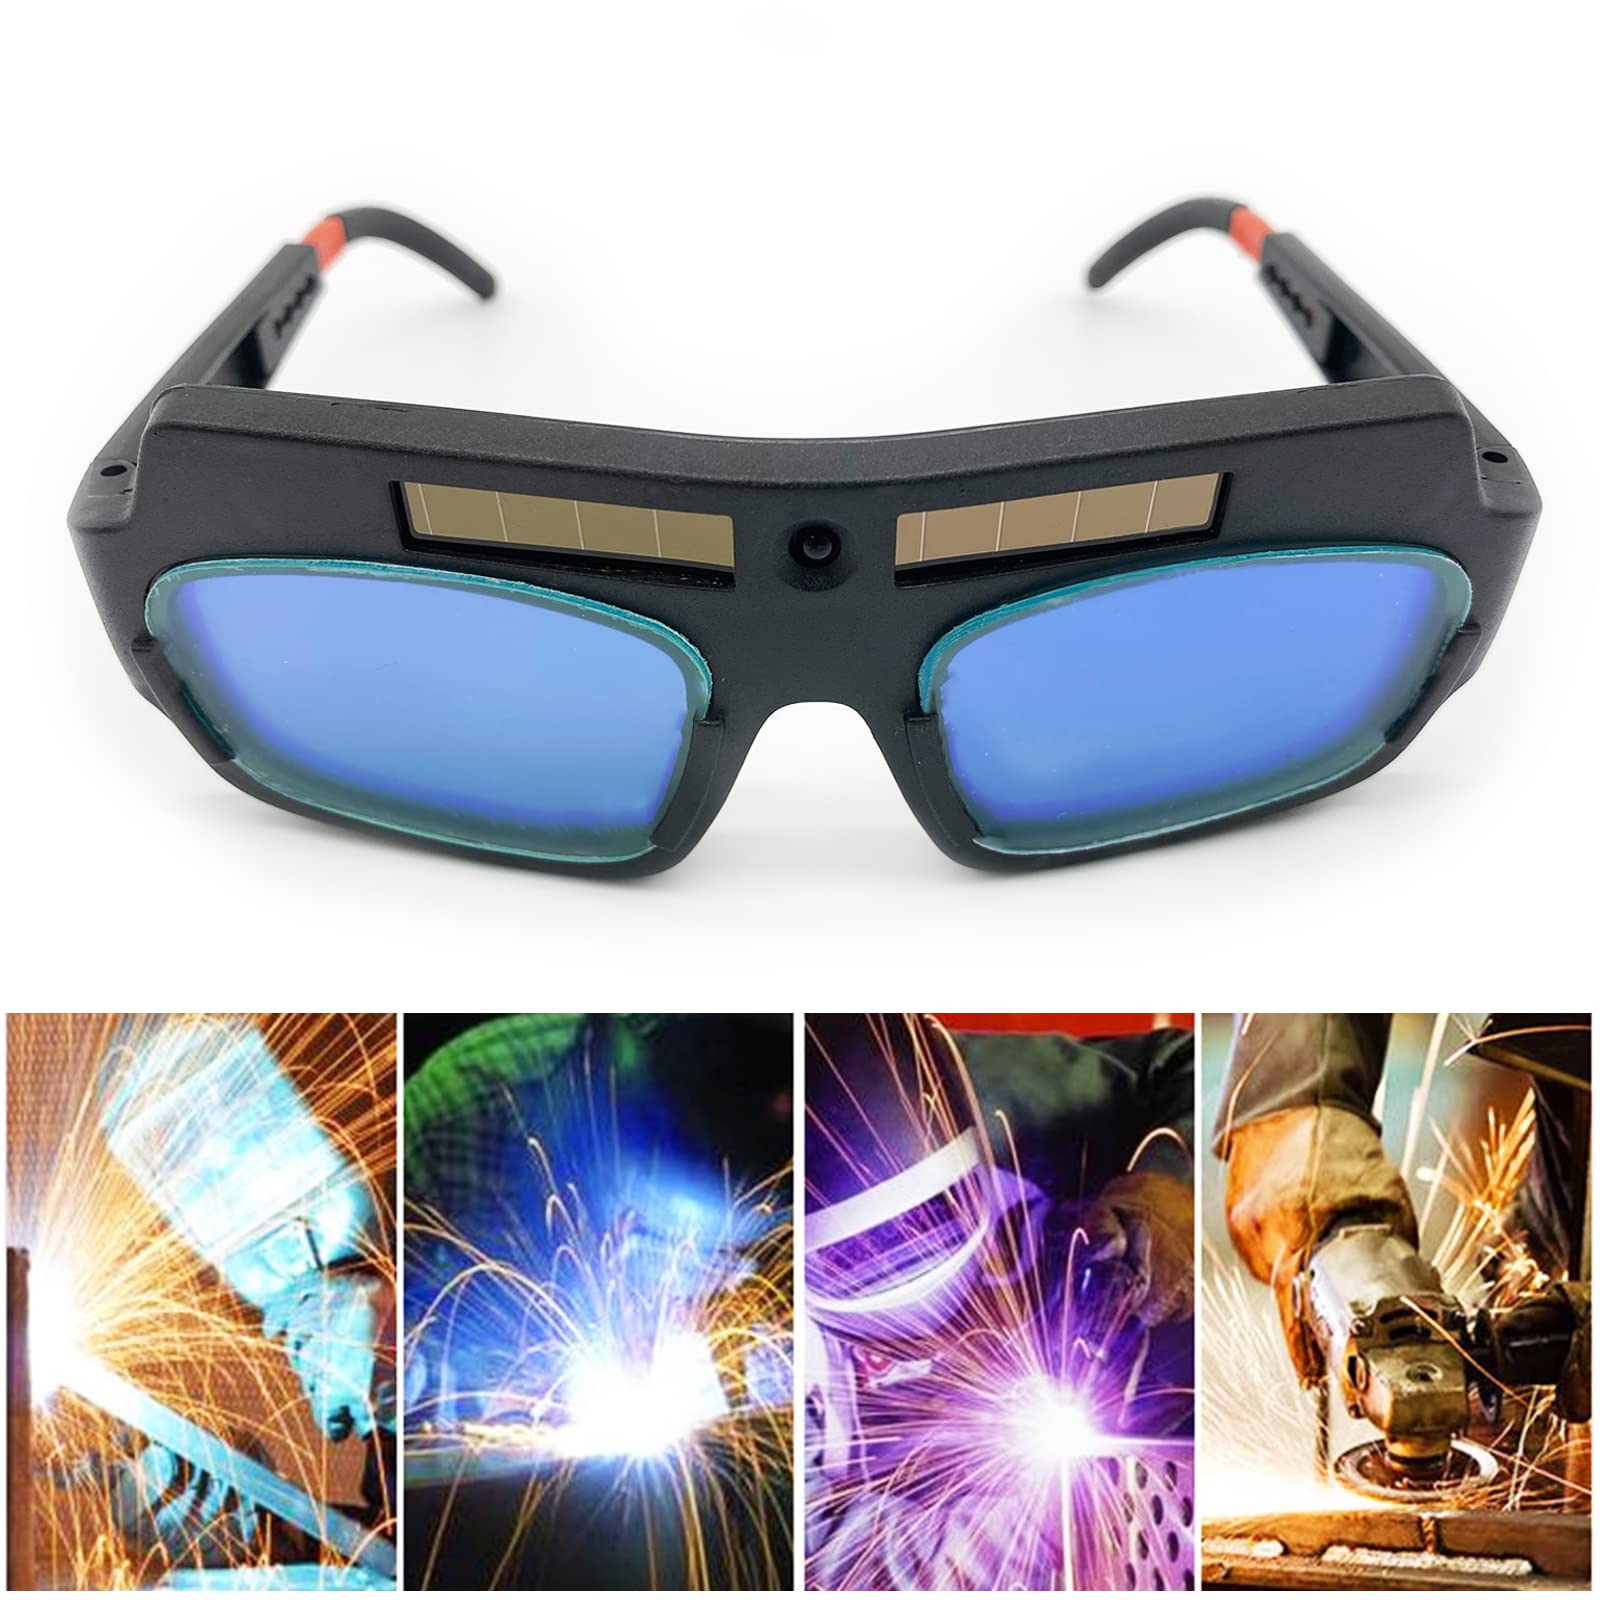 Melgweldr Welding Glasses Auto Darkening,Solar Welding Goggles Welder Safety Eye Protection Anti-Flog Anti-glare PC Goggles with 10-PACK Welding Glasses Protective Lens